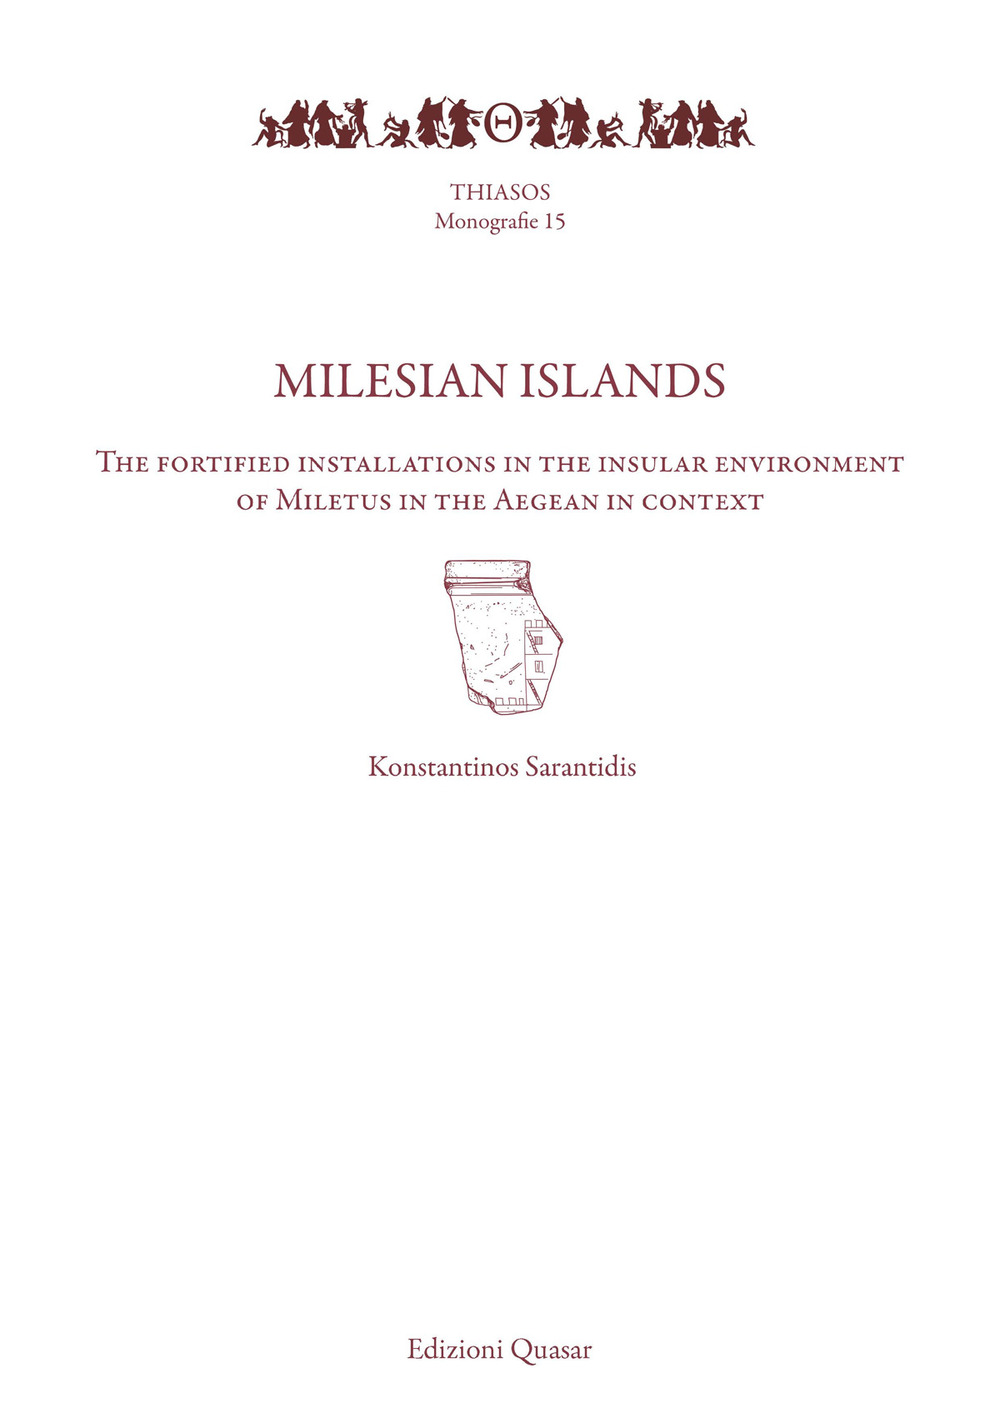 Milesian islands. The fortified installations in the insular environment of Miletus in the Aegean in context